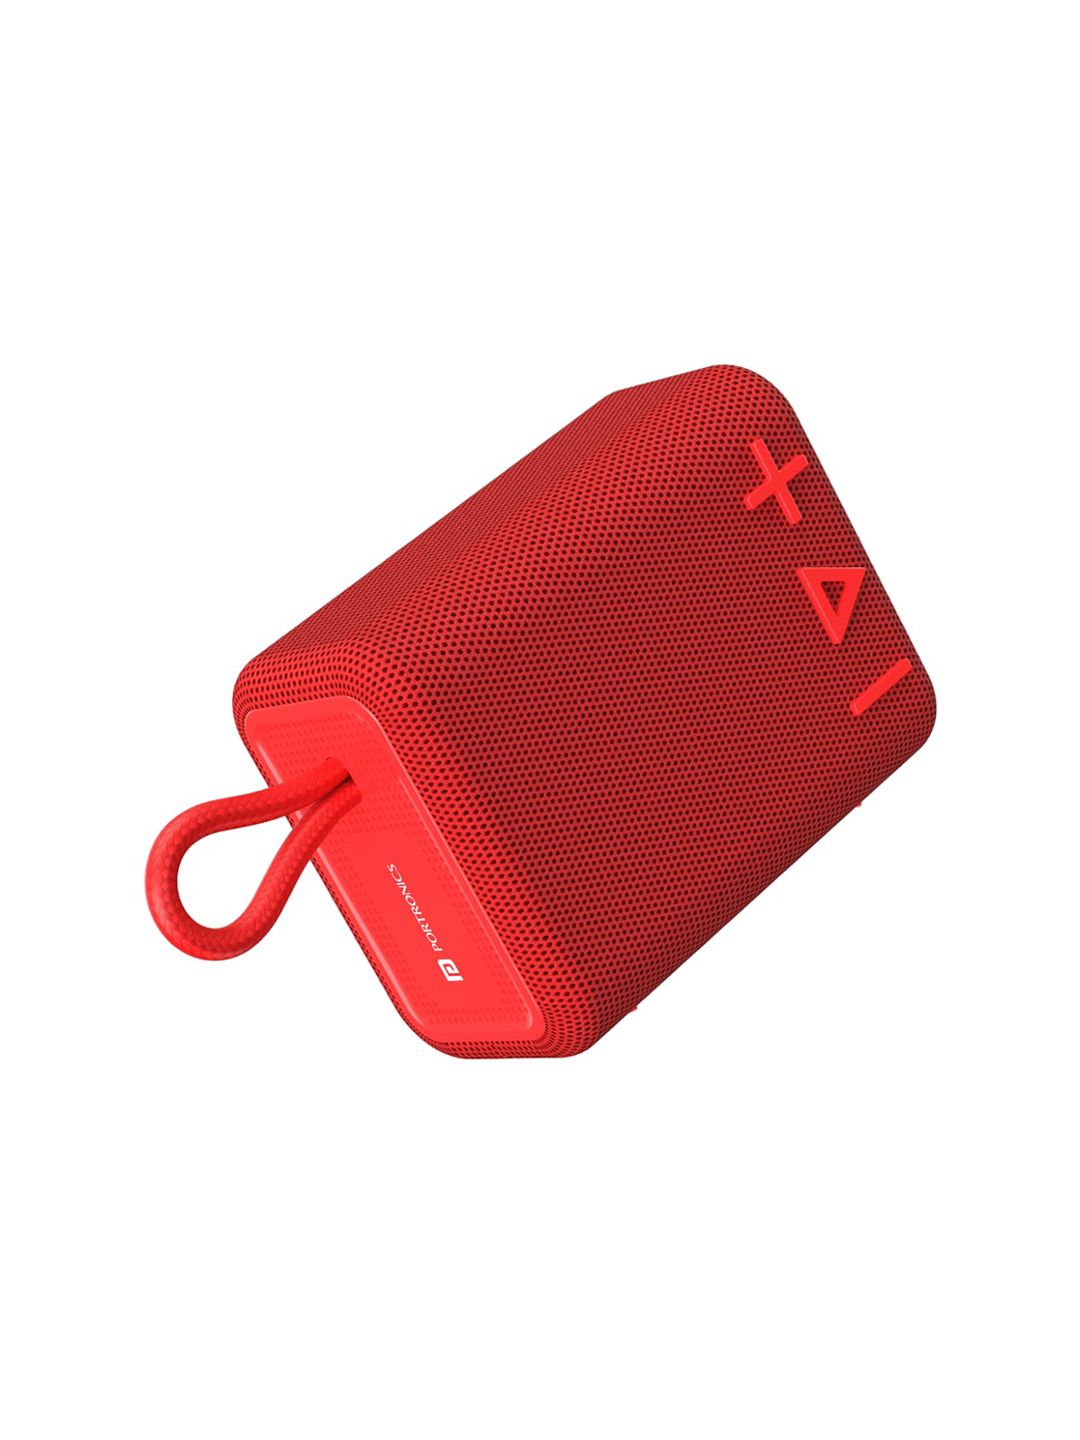 Portronics Red Breeze 4 Portable Bluetooth Speaker 5W with TWS Connectivity Price in India